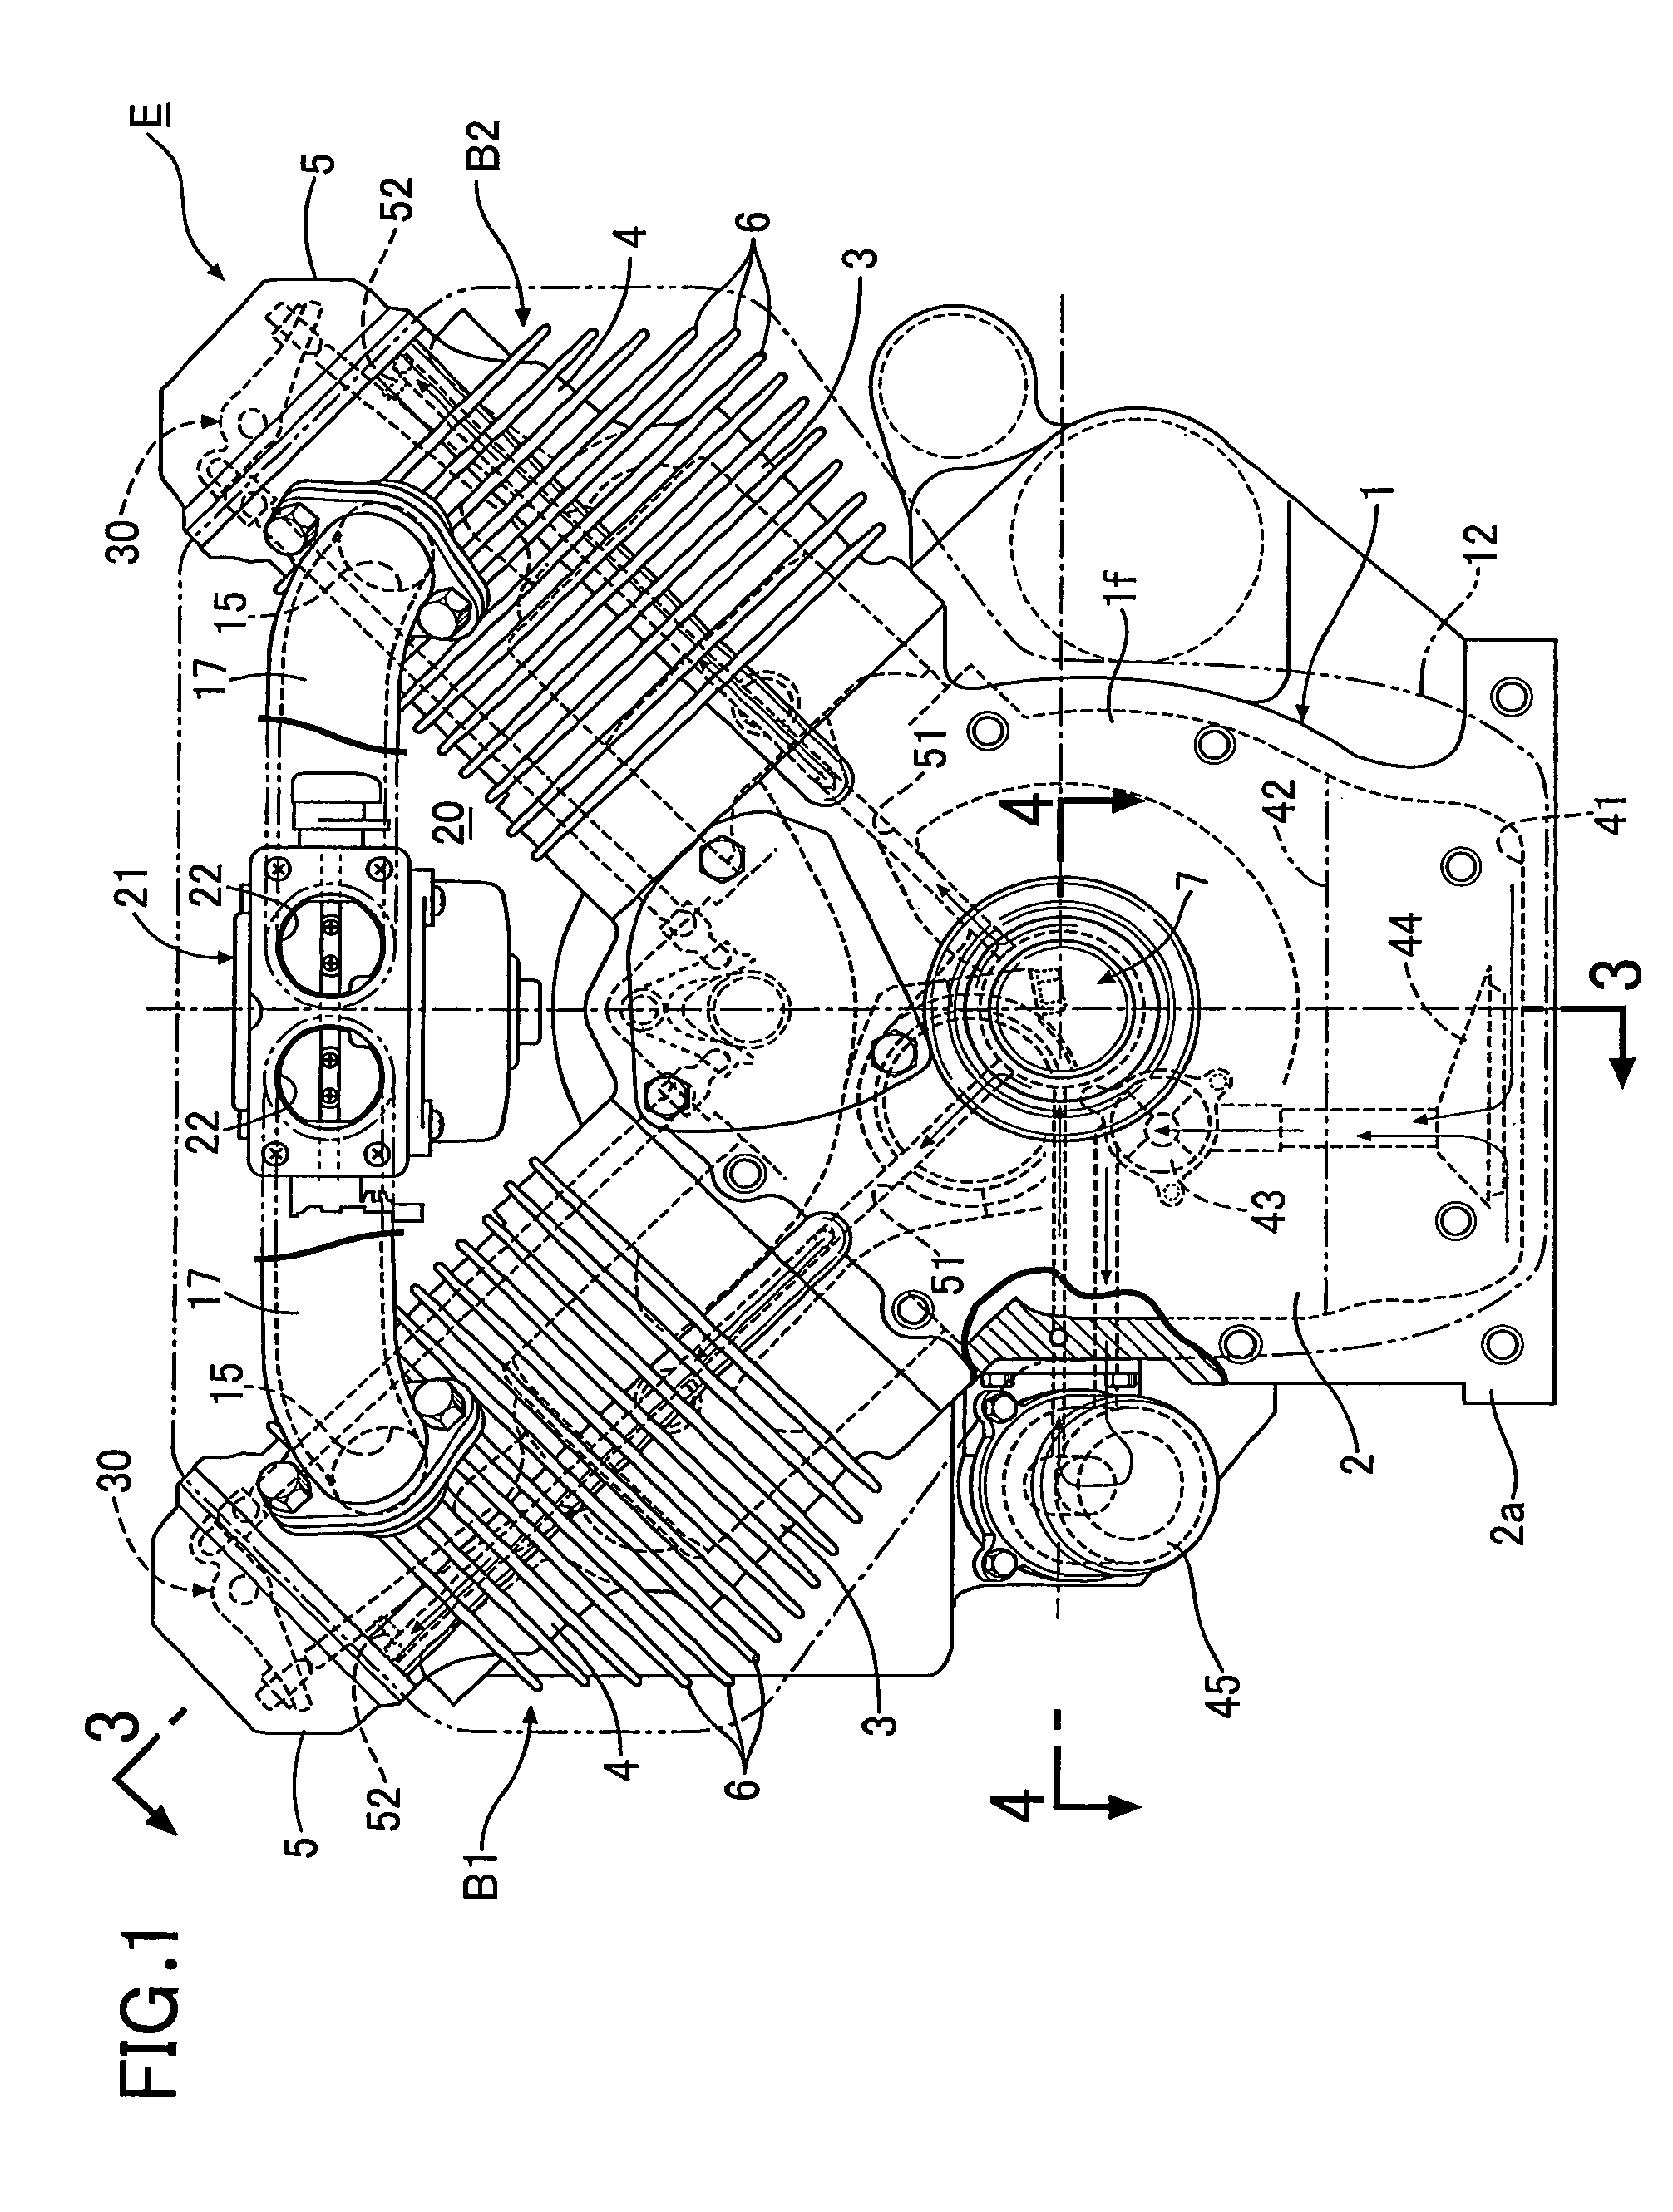 Lubricating system for air-cooled general-purpose engine